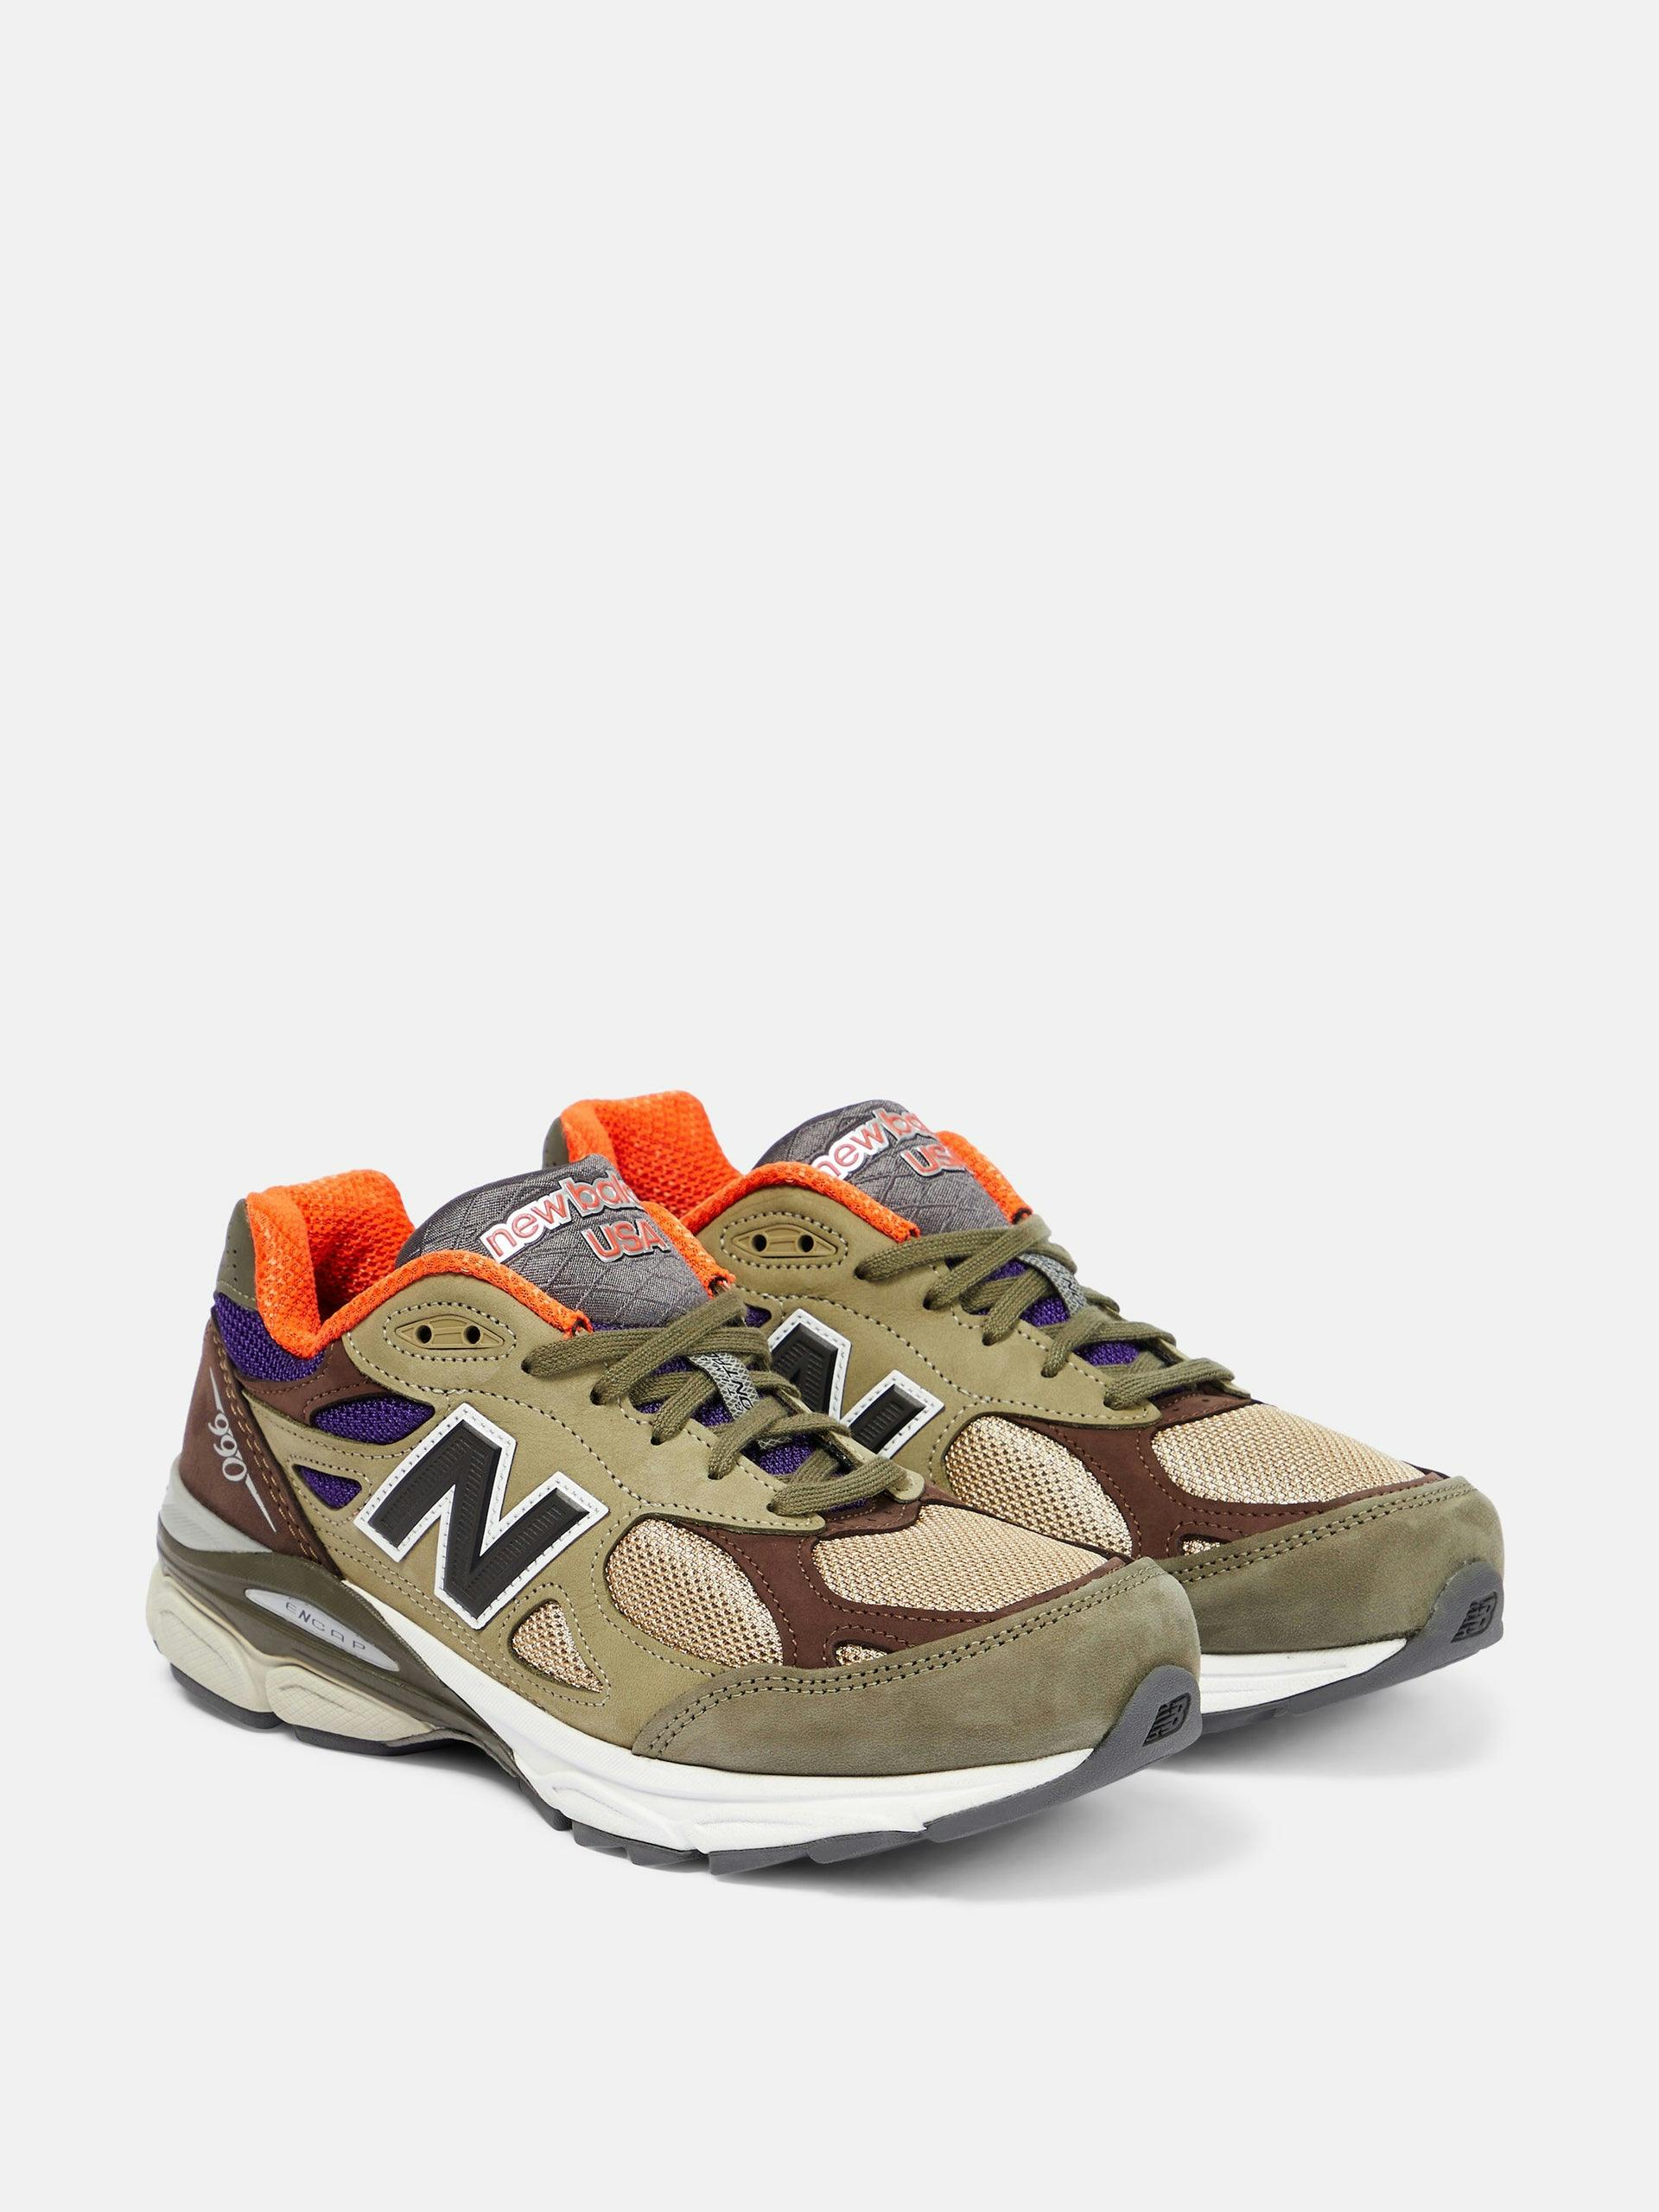 Suede and mesh 990v3 trainers